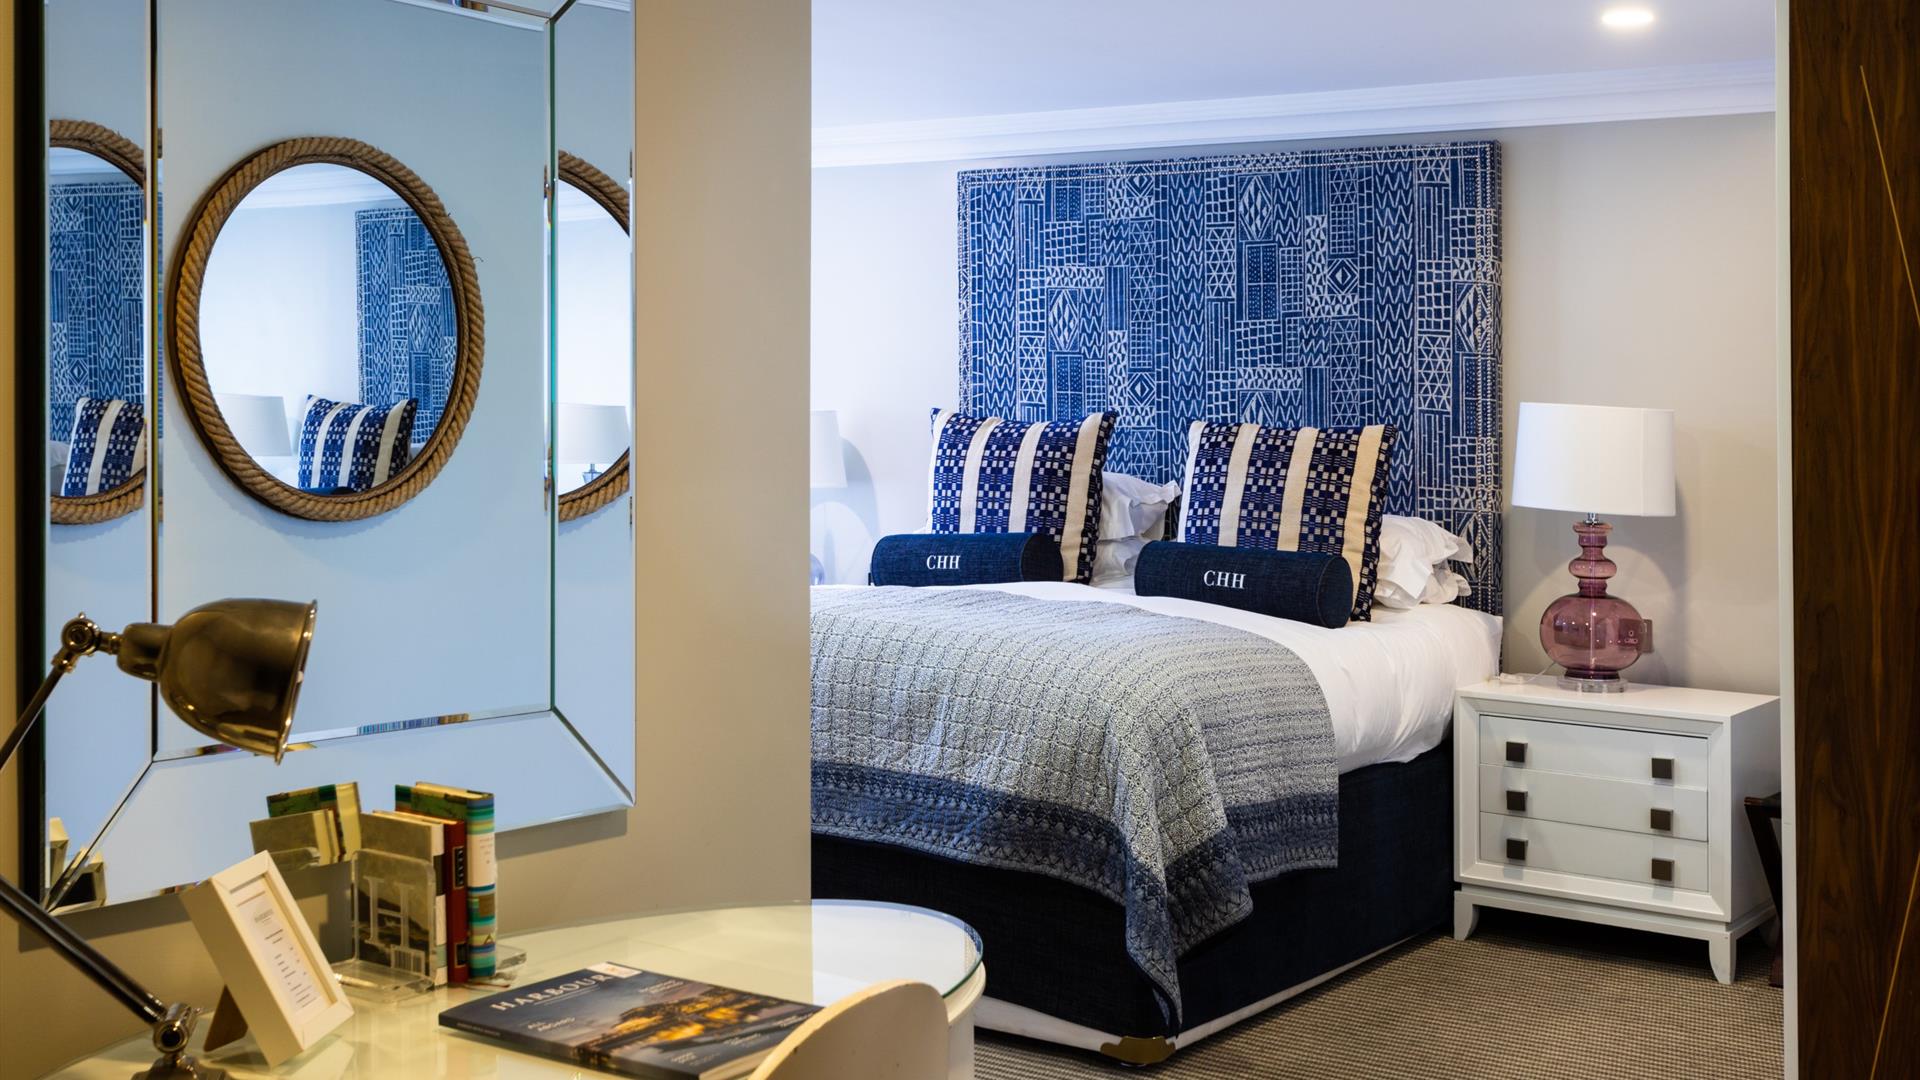 Inside a nautical themed room in Christchurch harbour hotel and spa